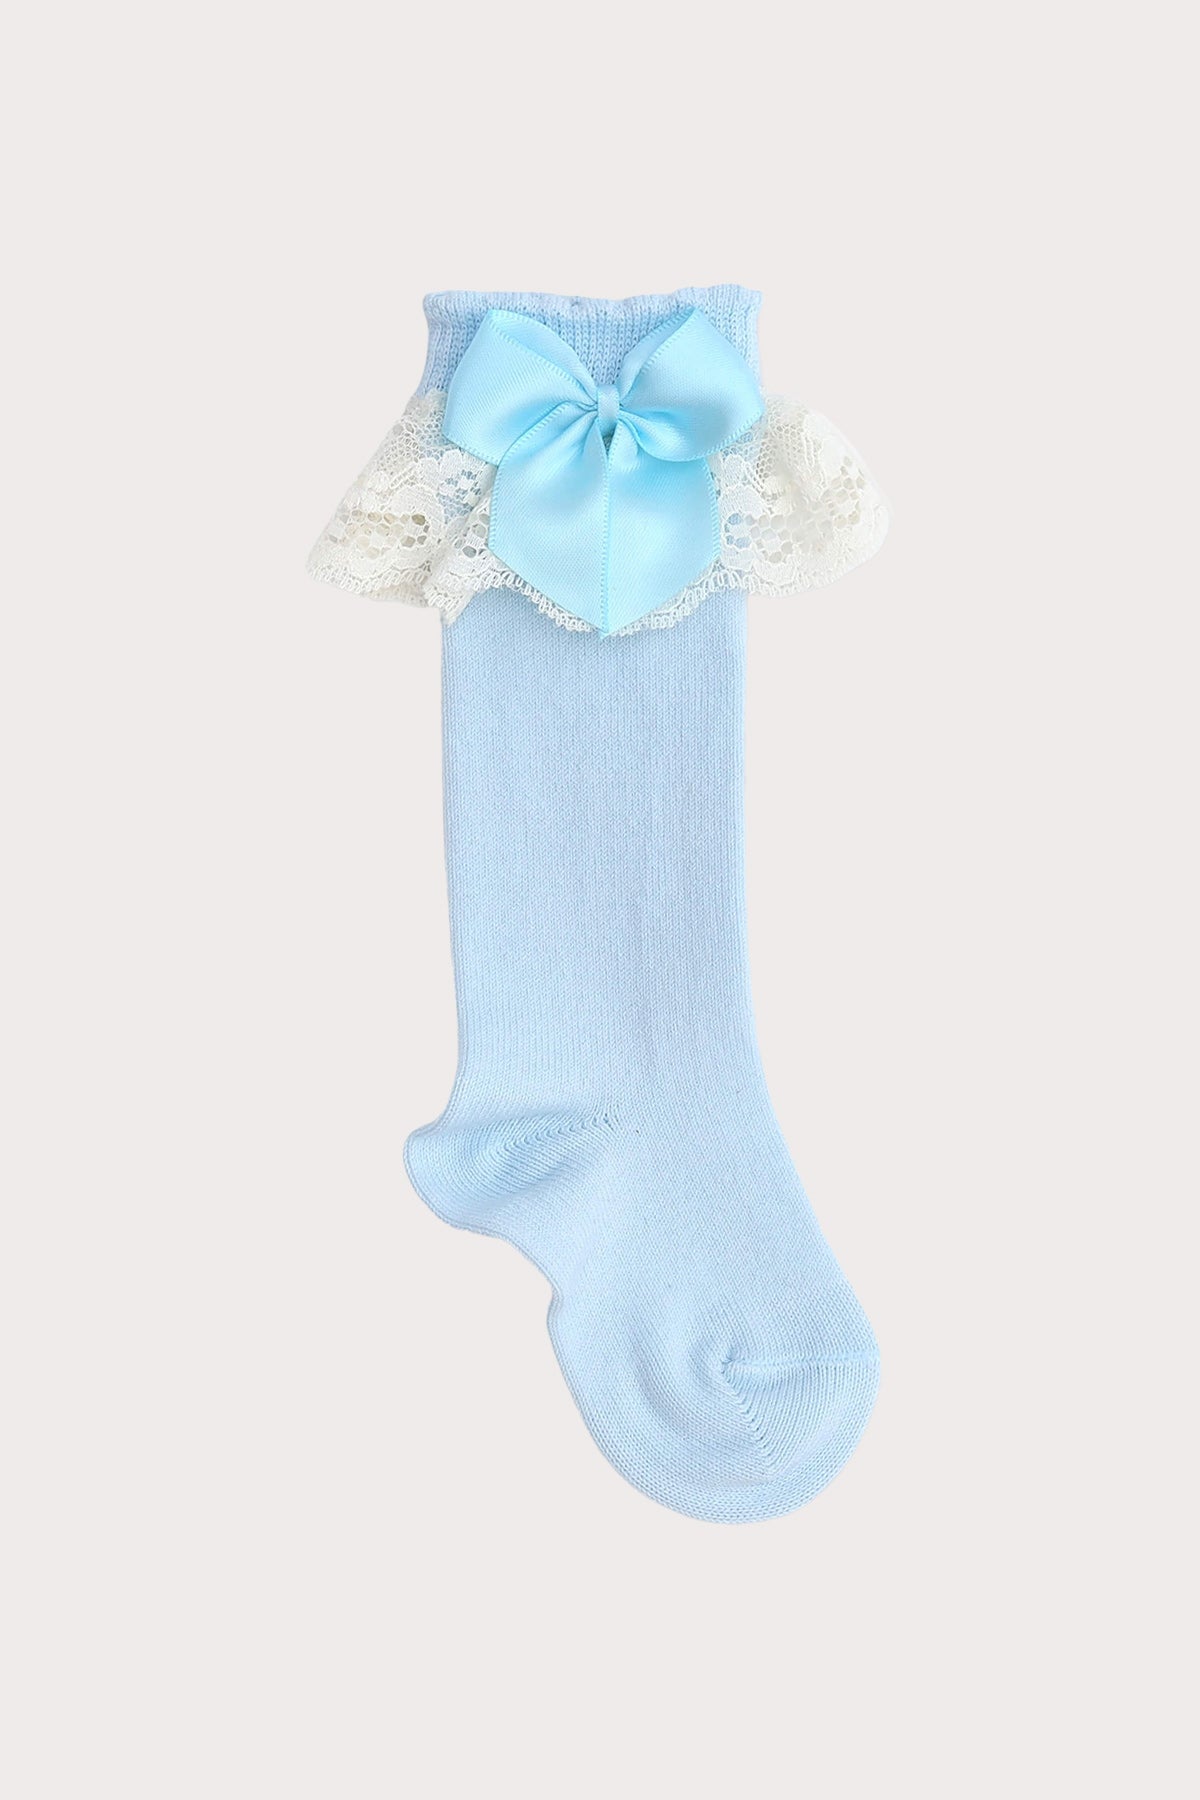 girls knee high socks baby blue with spanish lace